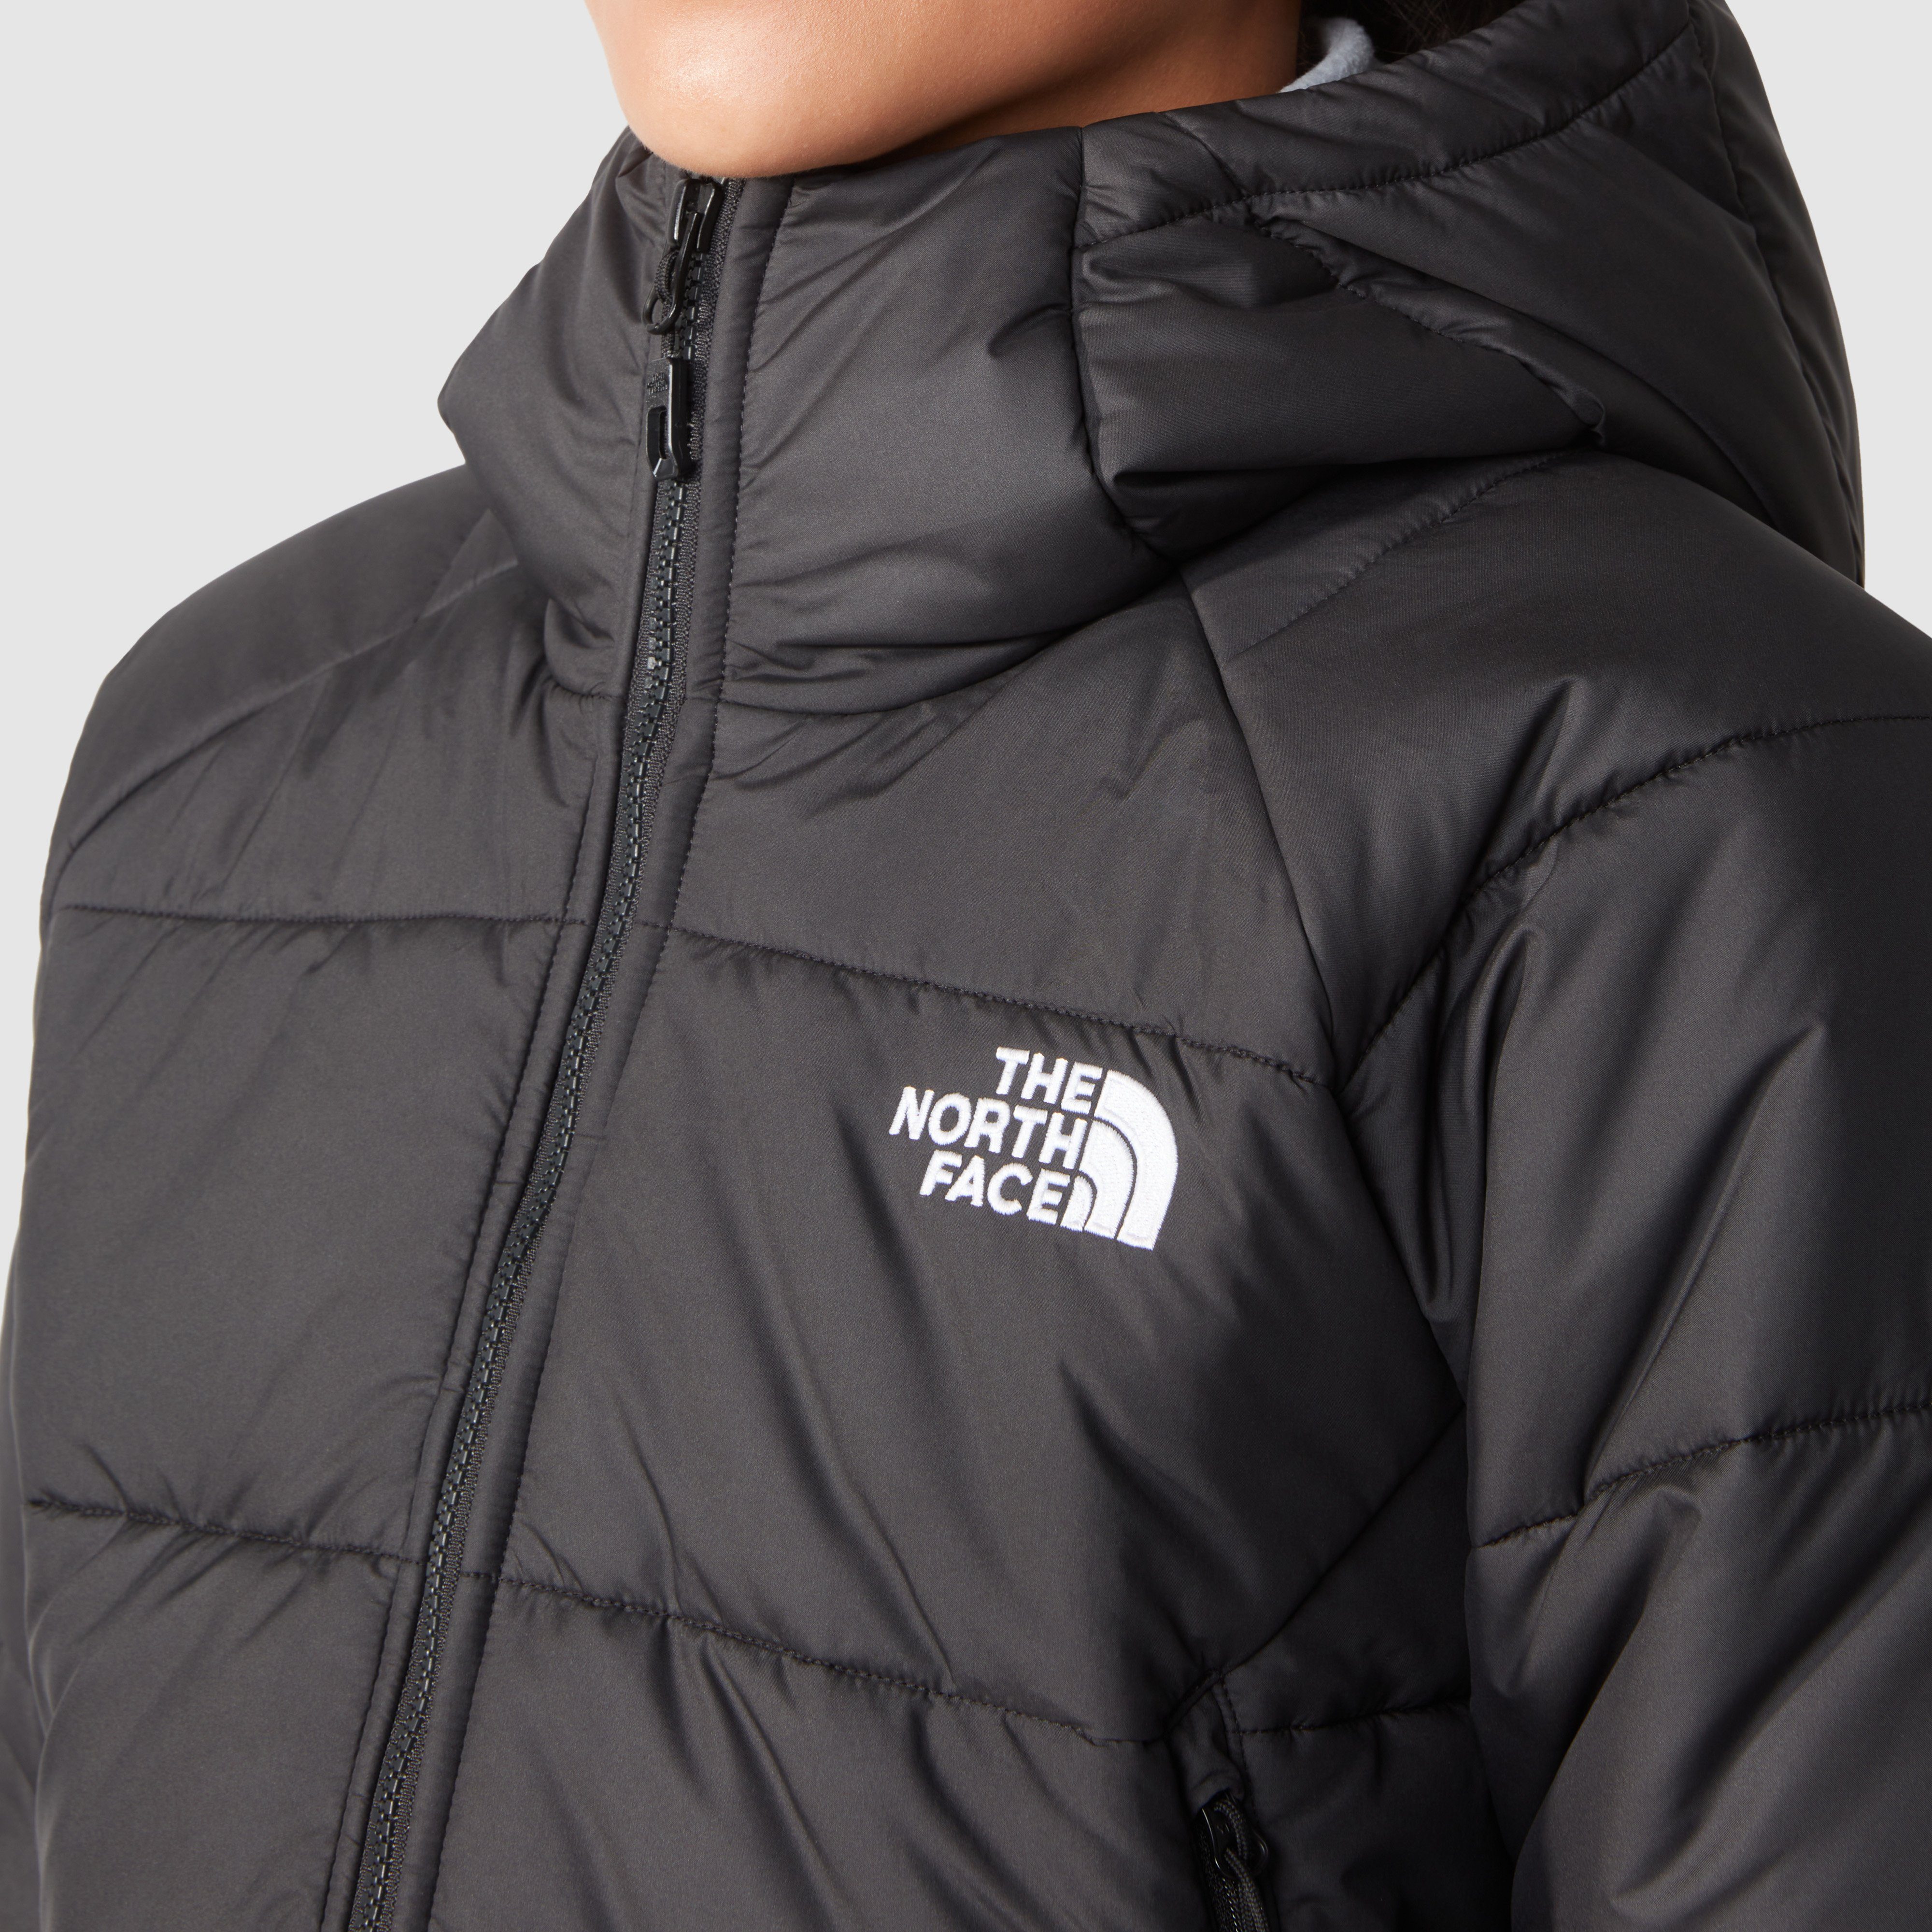 The North Face Funktionsjacke W HYALITE Logodruck HOODIE black SYNTHETIC mit